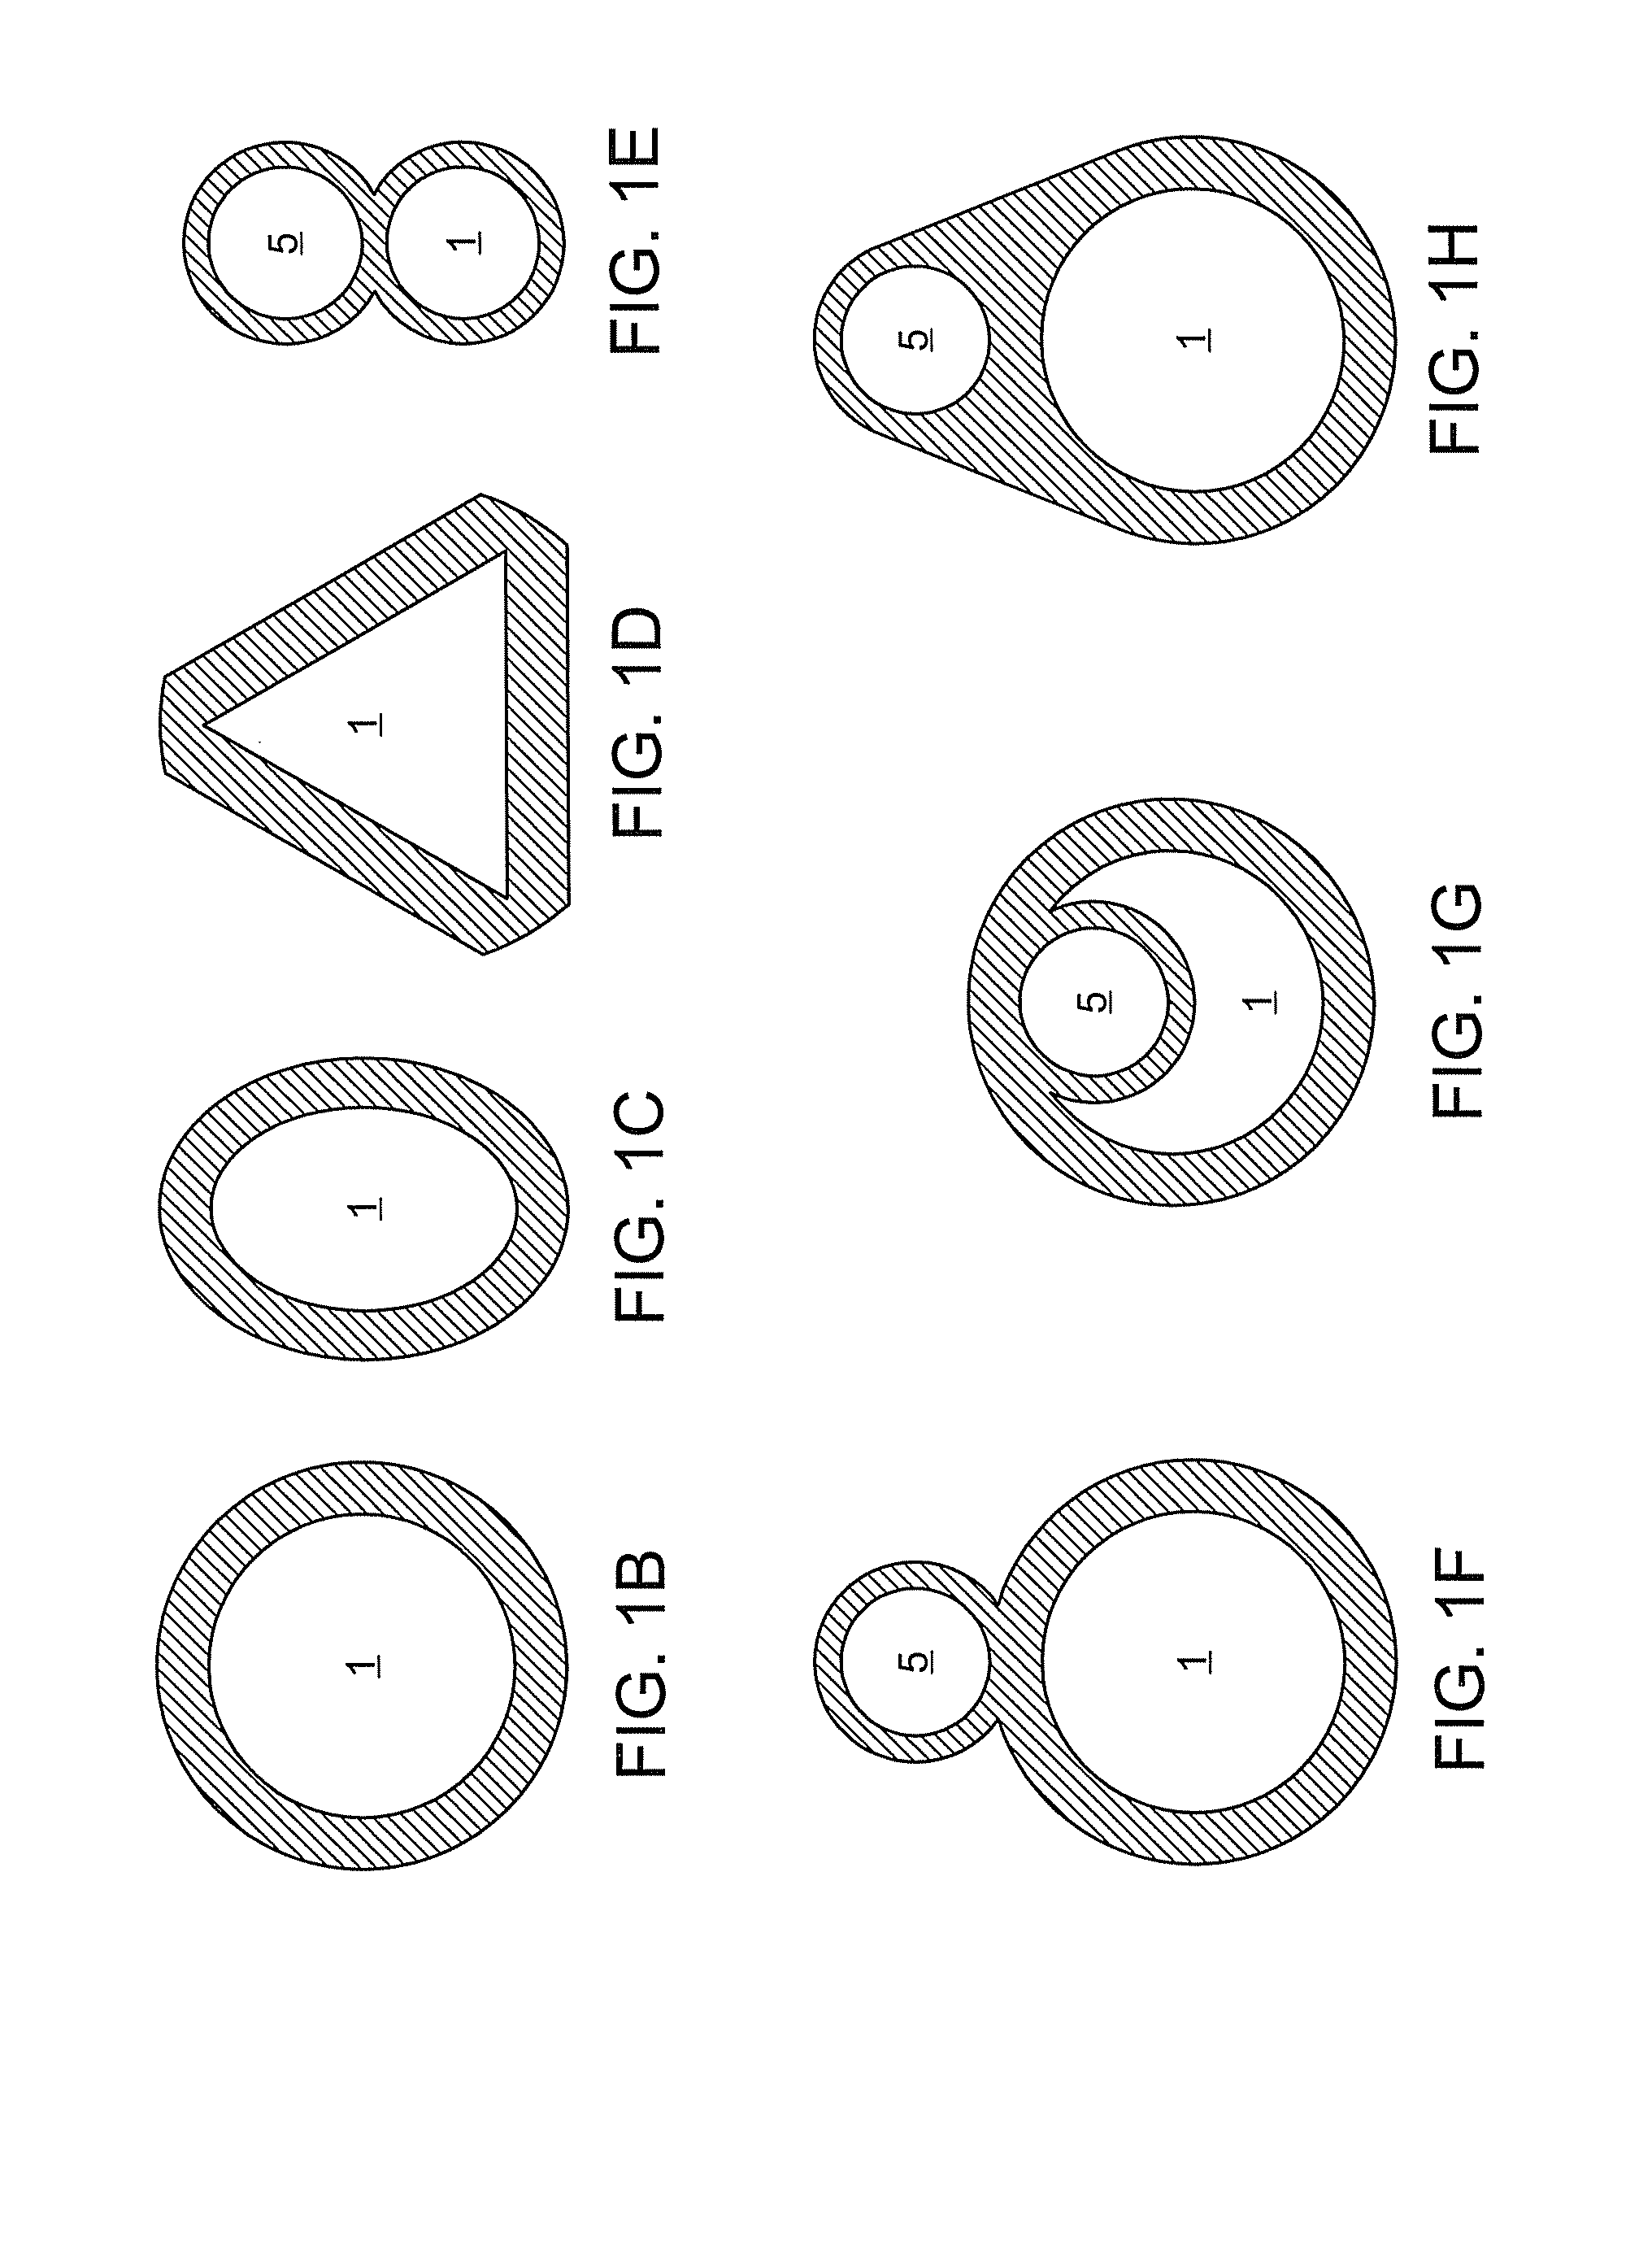 Airway management devices, endoscopic conduits, surgical kits, and methods of using the same